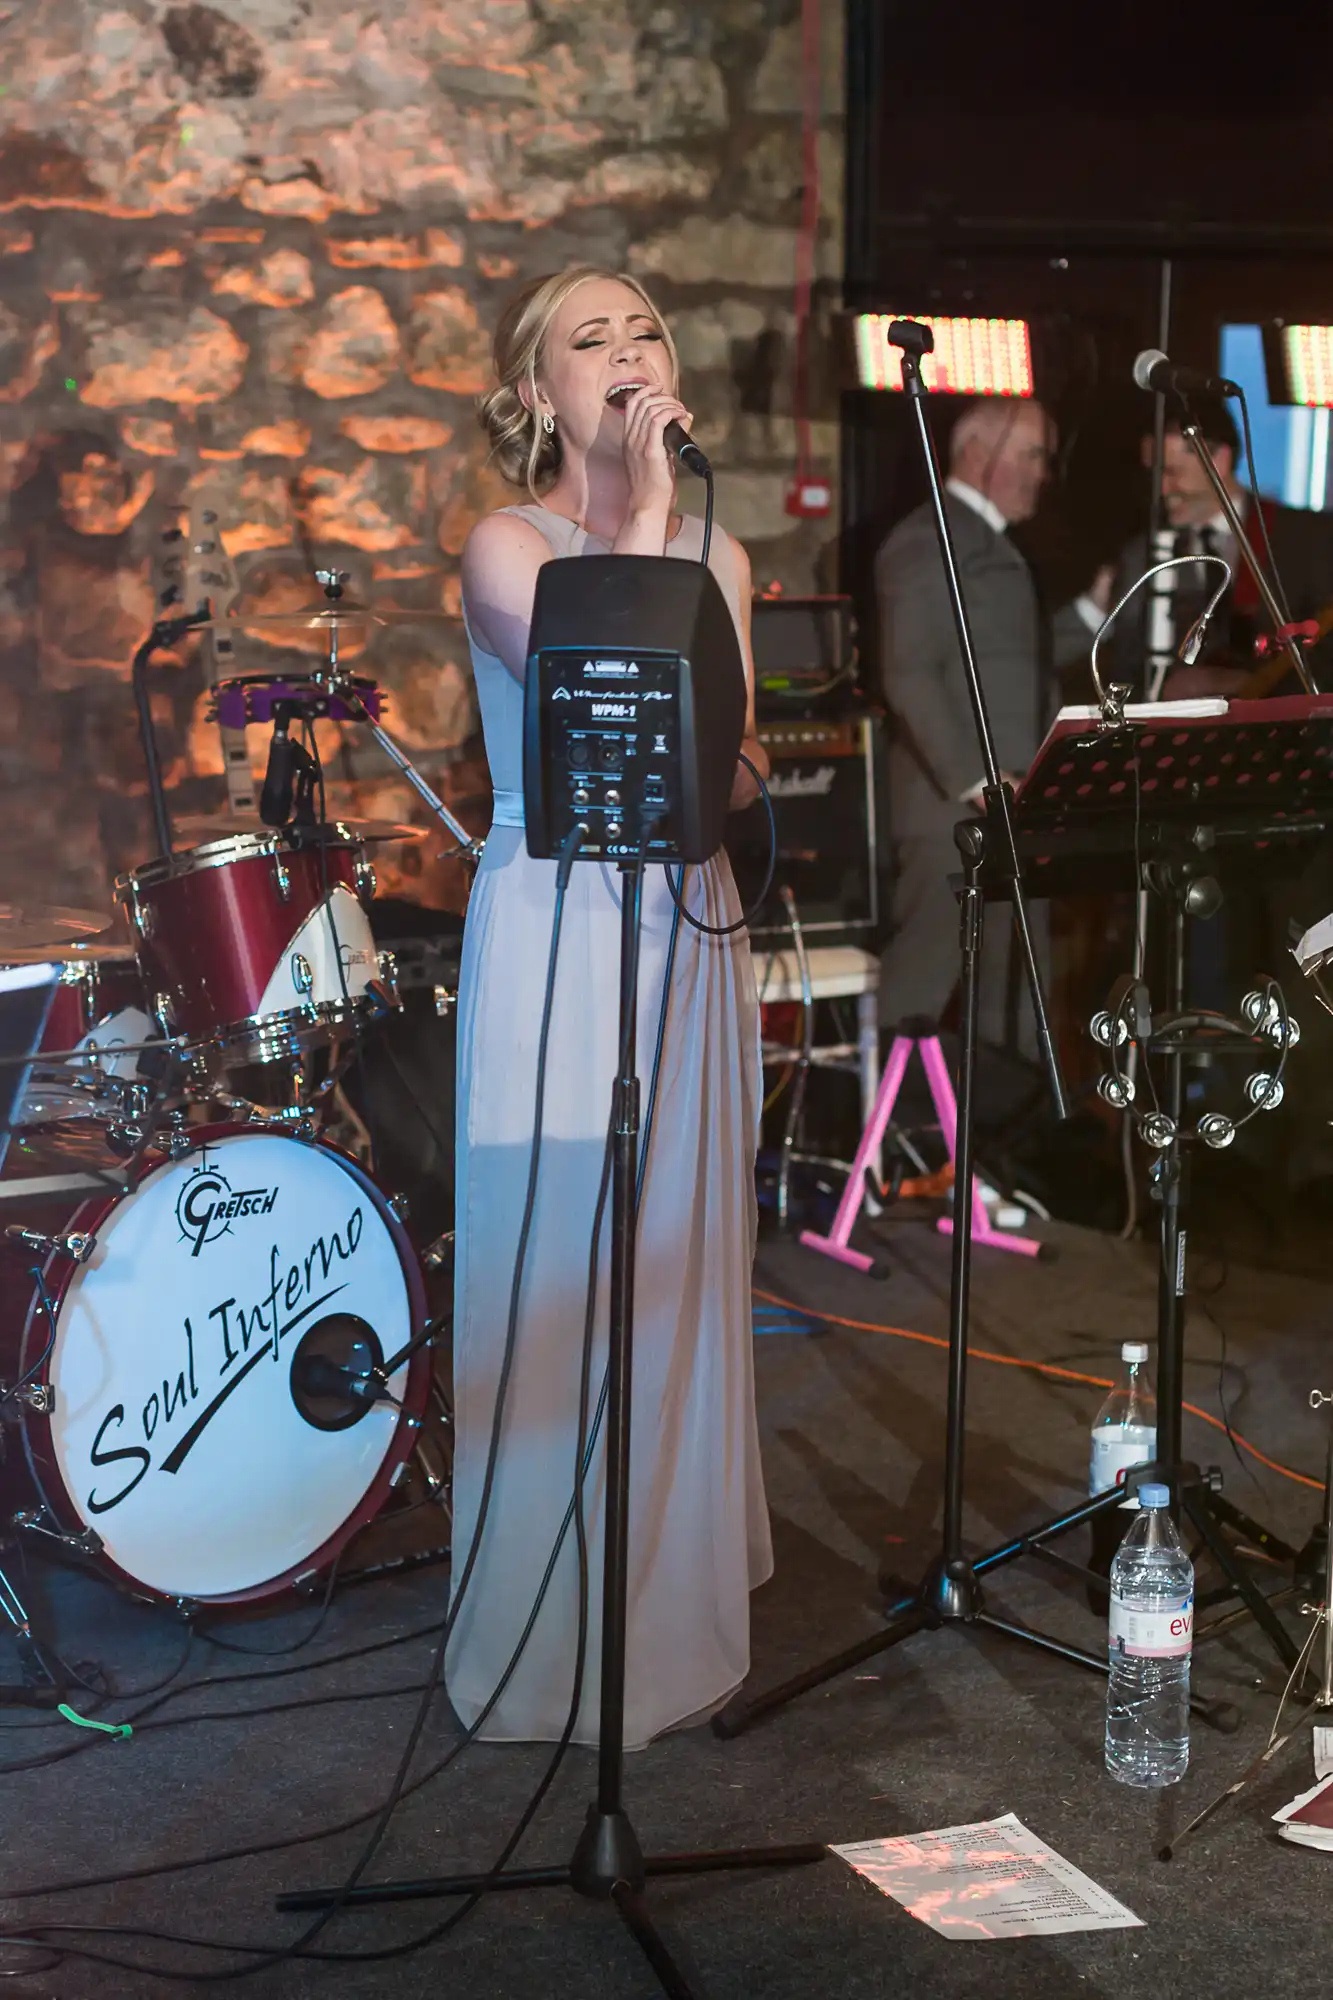 A female singer performing at a live event with a band named soul inferno in the background, using a microphone and a music stand.